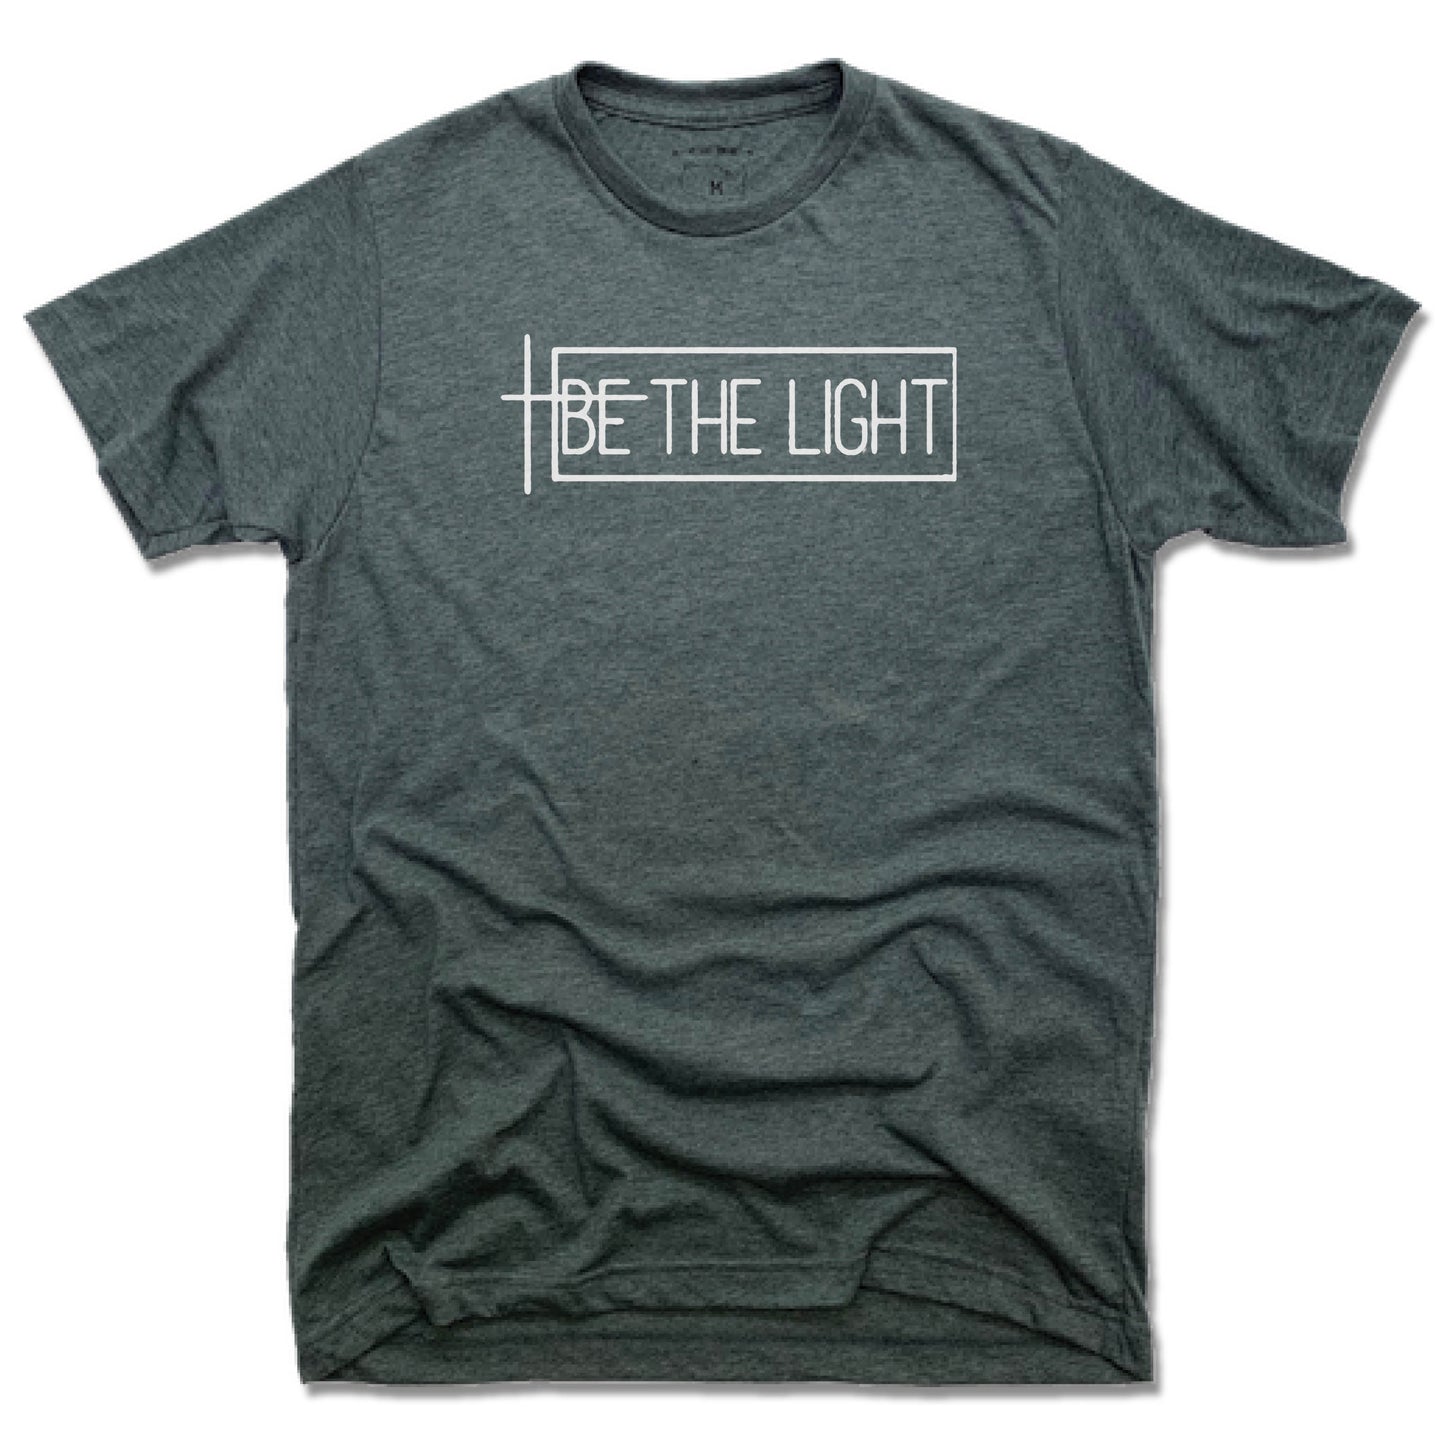 THE SISTER'S CLOSET | UNISEX TEE | BE THE LIGHT